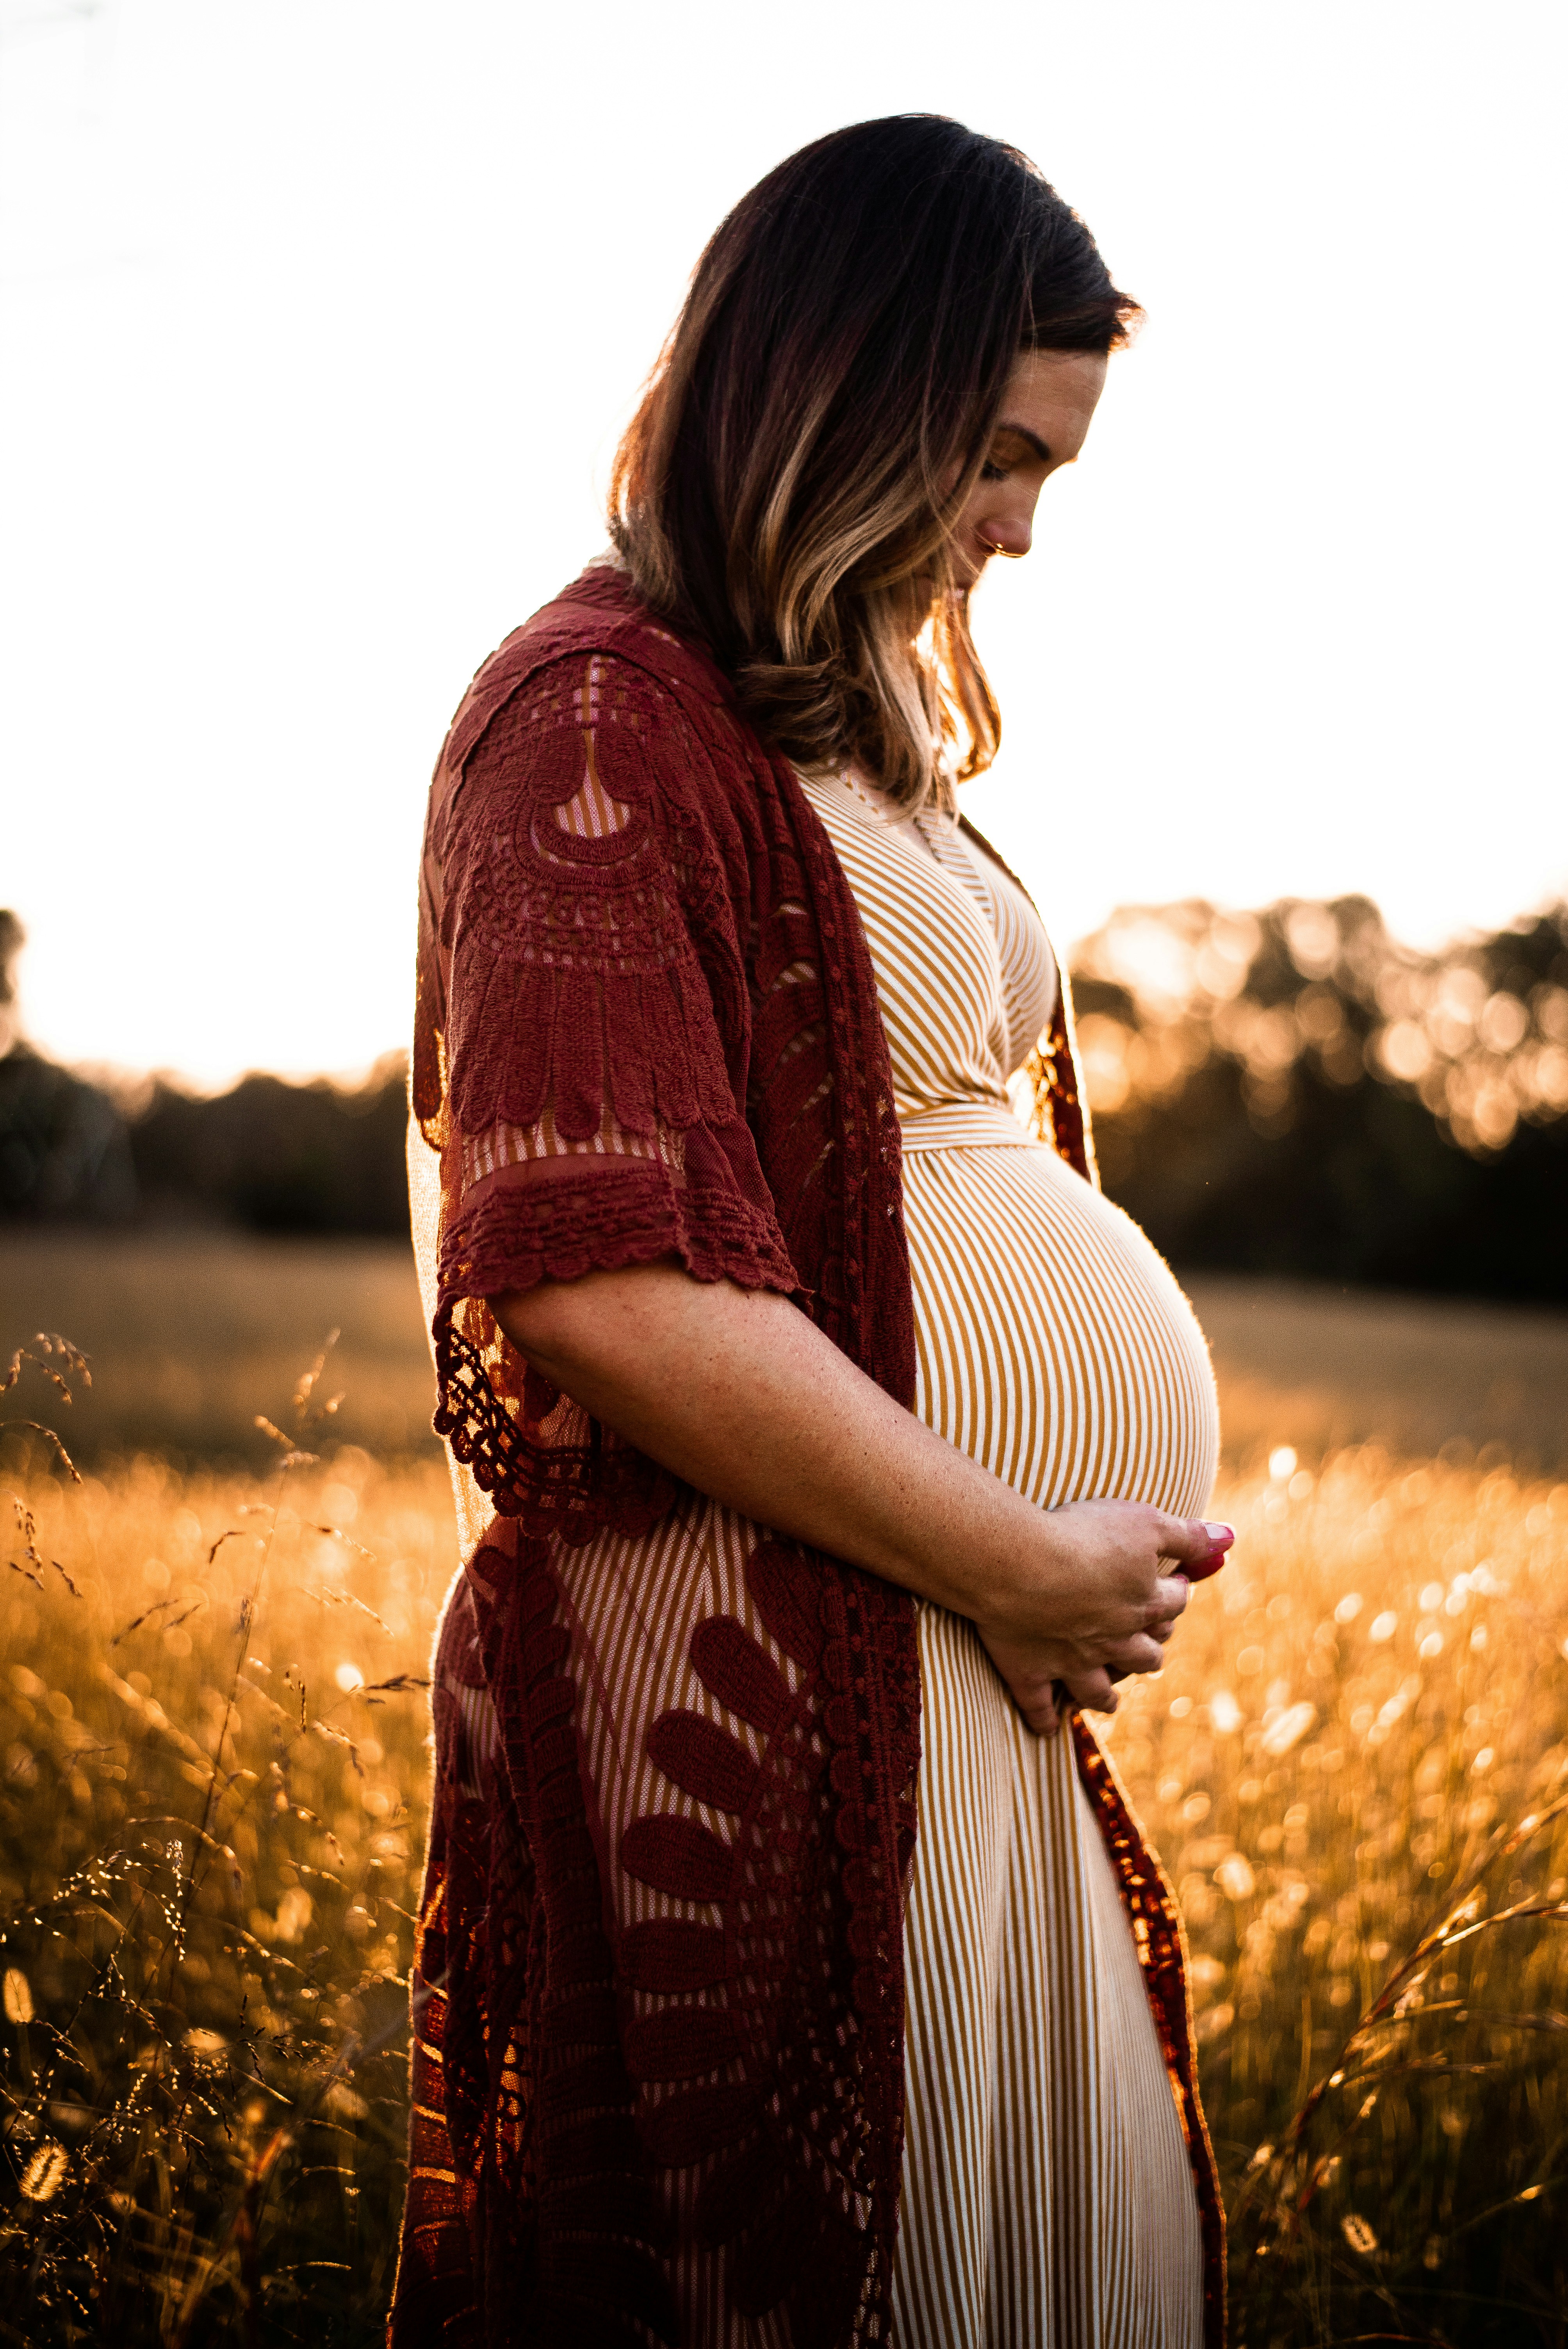 Is Chiropractic Okay for Pregnancy?